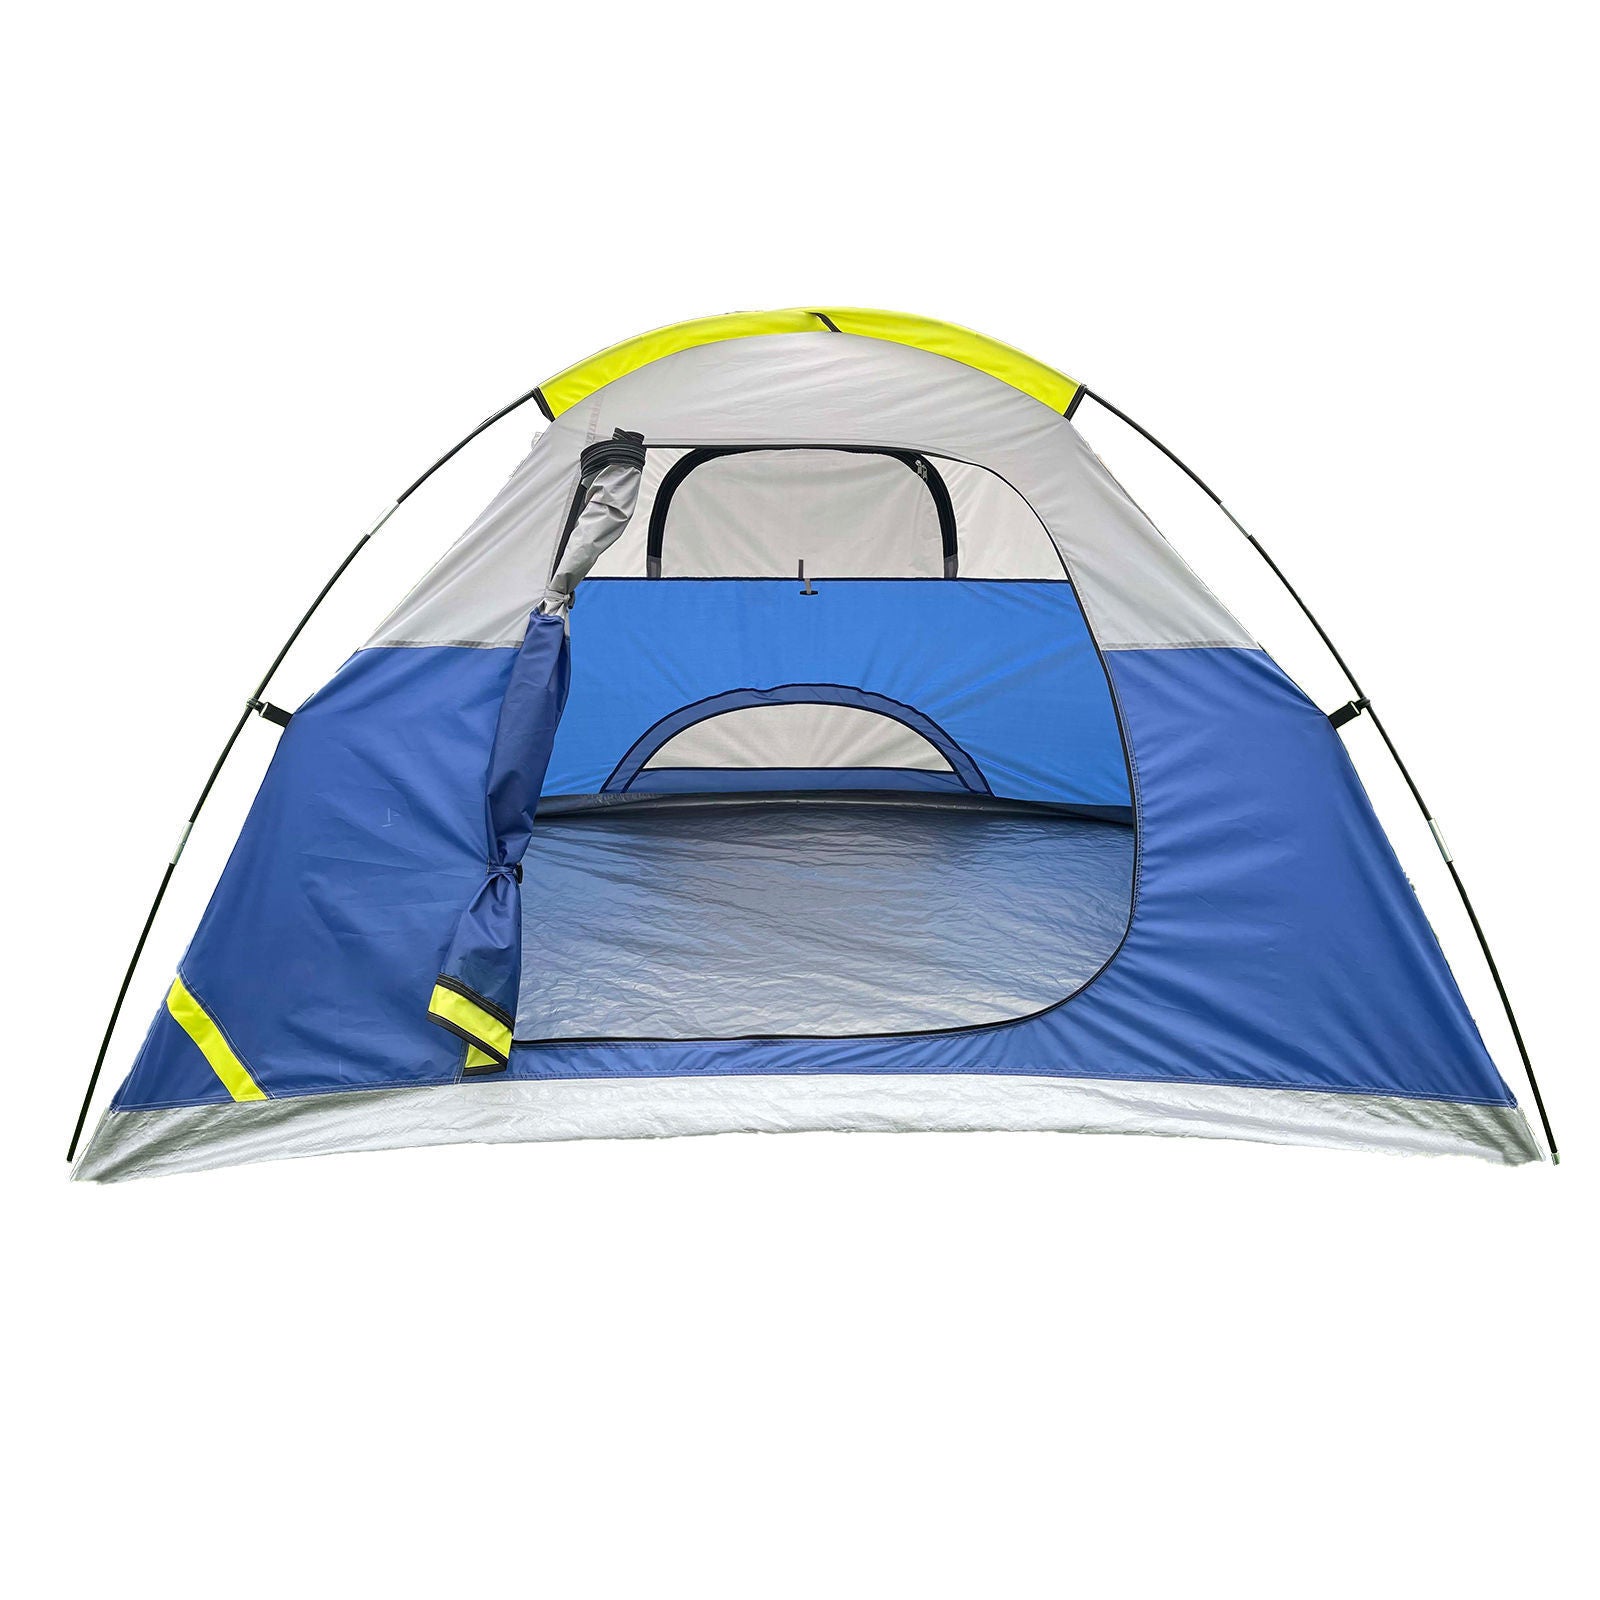 Havana Outdoors 2-3 Person Tent Lightweight Hiking Backpacking Camping - 0